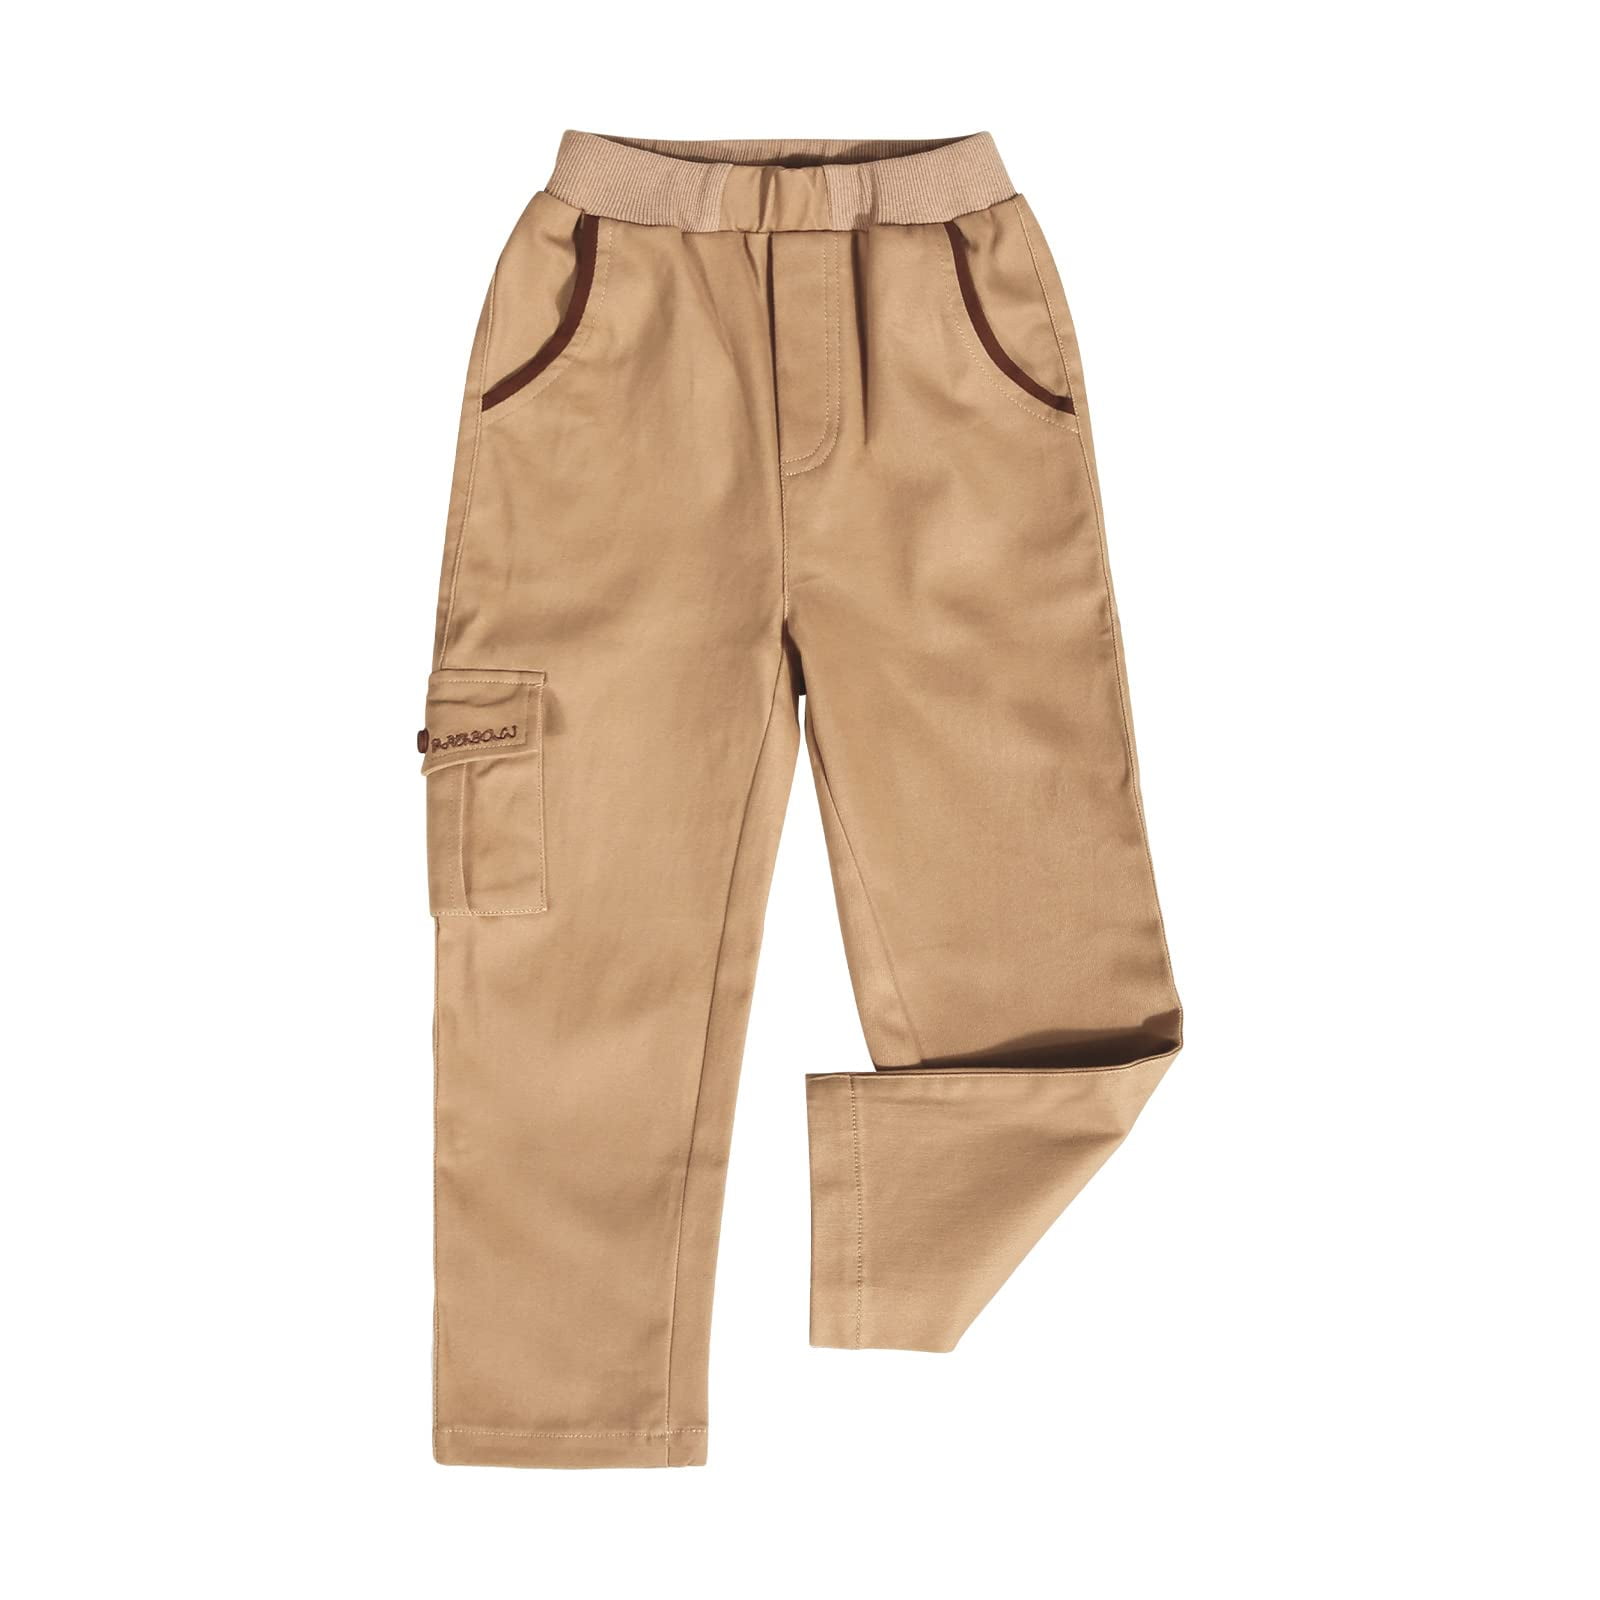 Bouclede Toddler Boys Cargo Pants Casual Cargo Pants with Side Pocket  Trousers for Toddler Boys (Khaki, 2-3 T) 